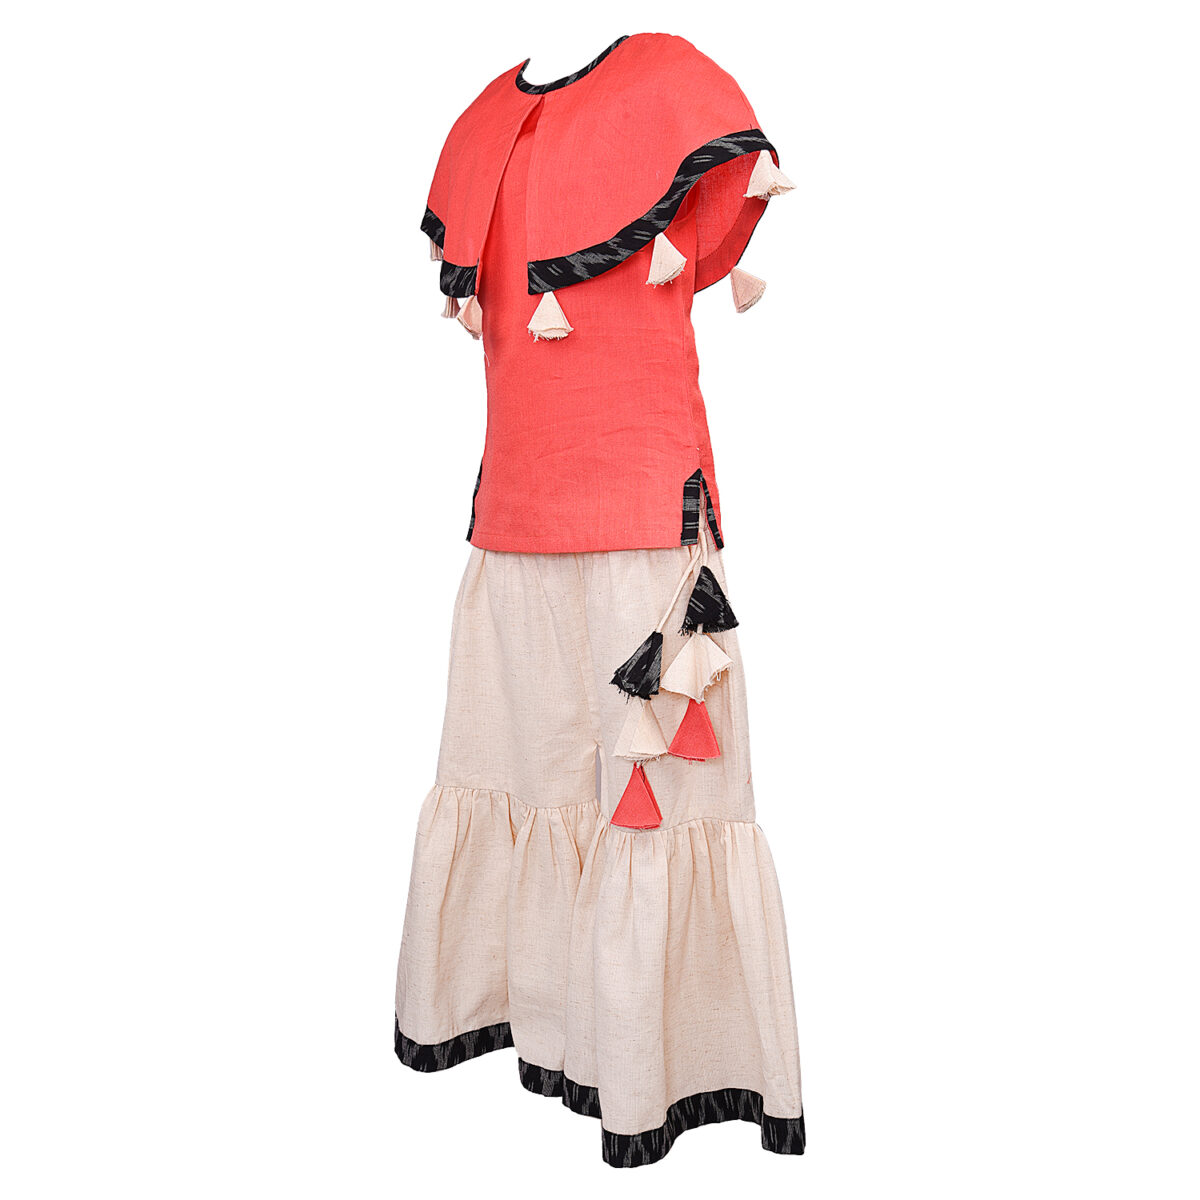 DSC 0756 copy Cape Style Tassel Kurti With Sharara- Pink and White